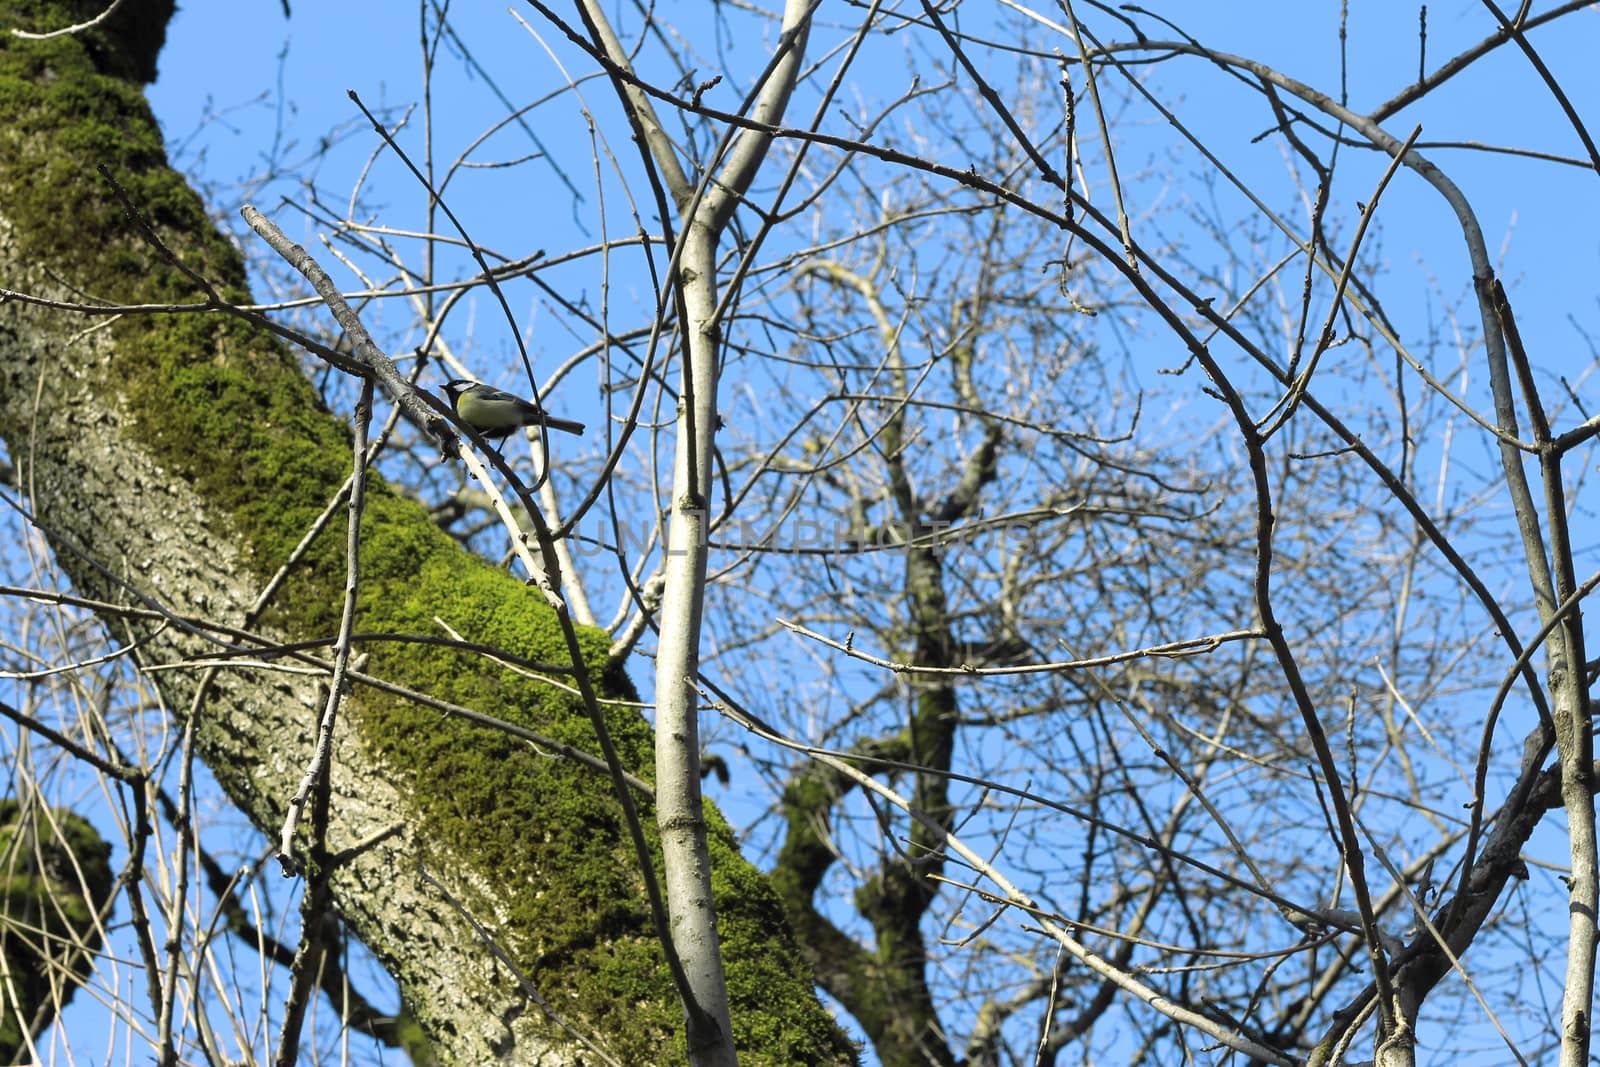 Tit birds on the branch in the winter forest